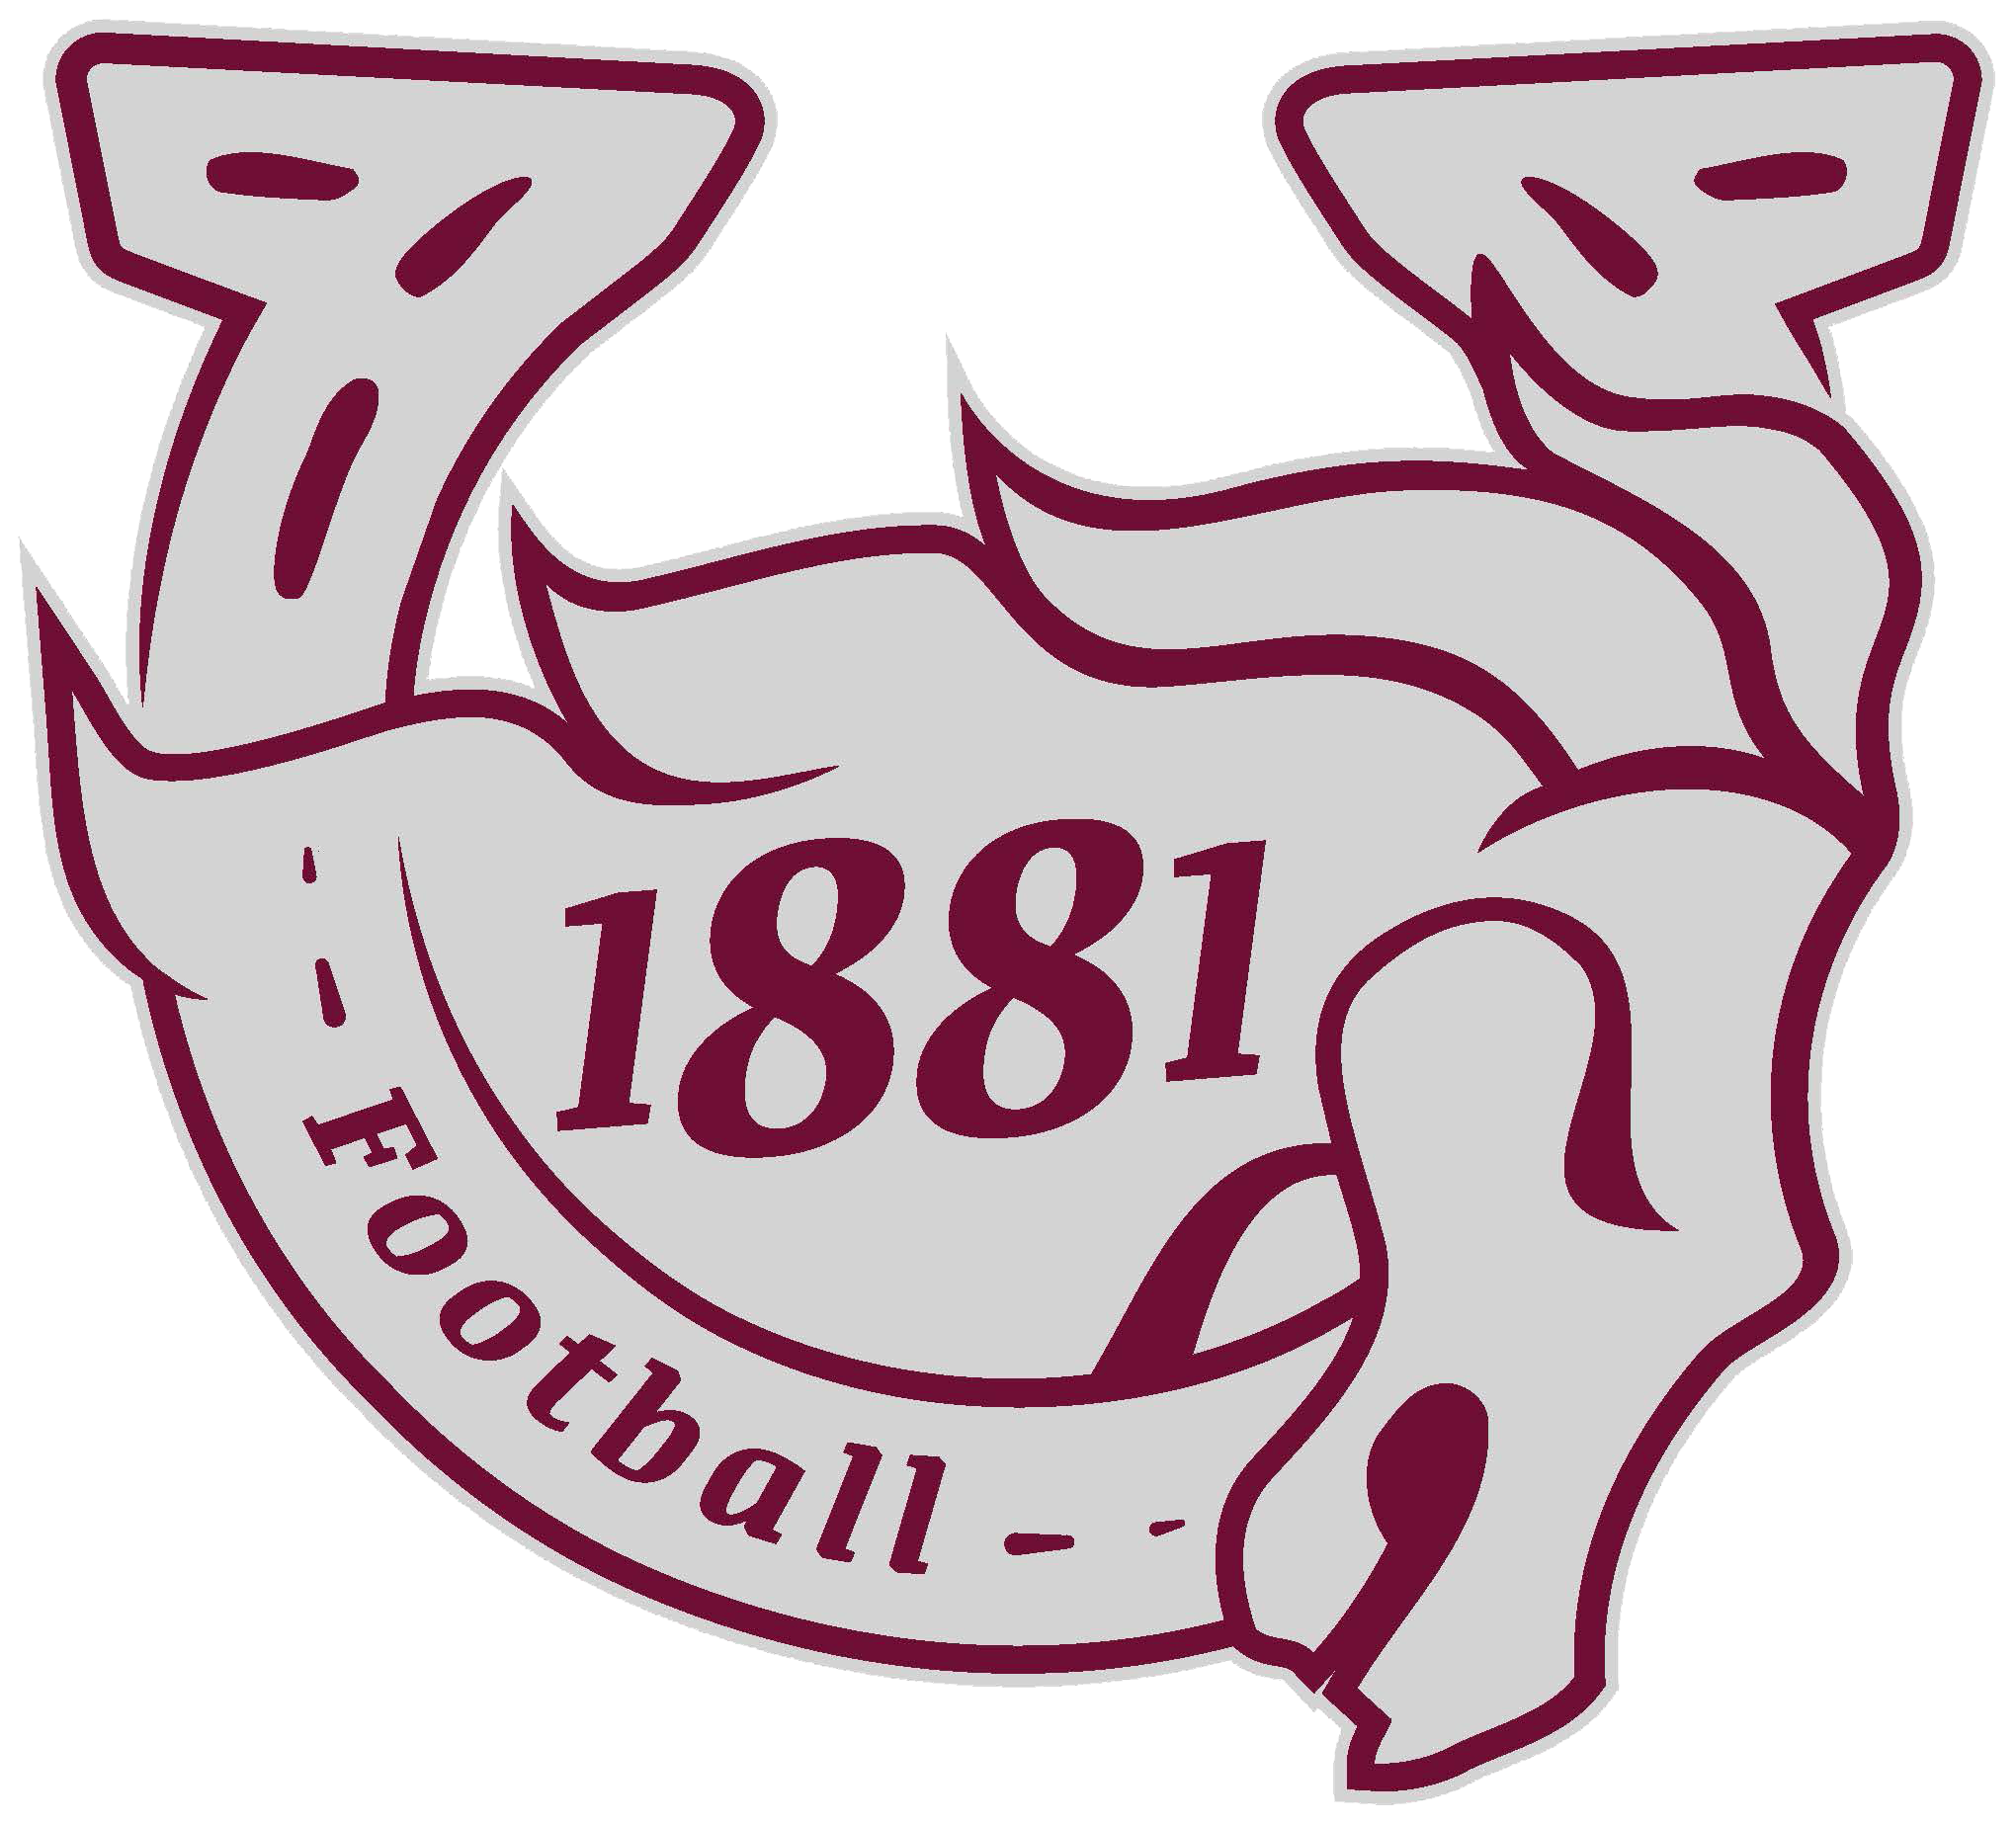 new1881logo.png